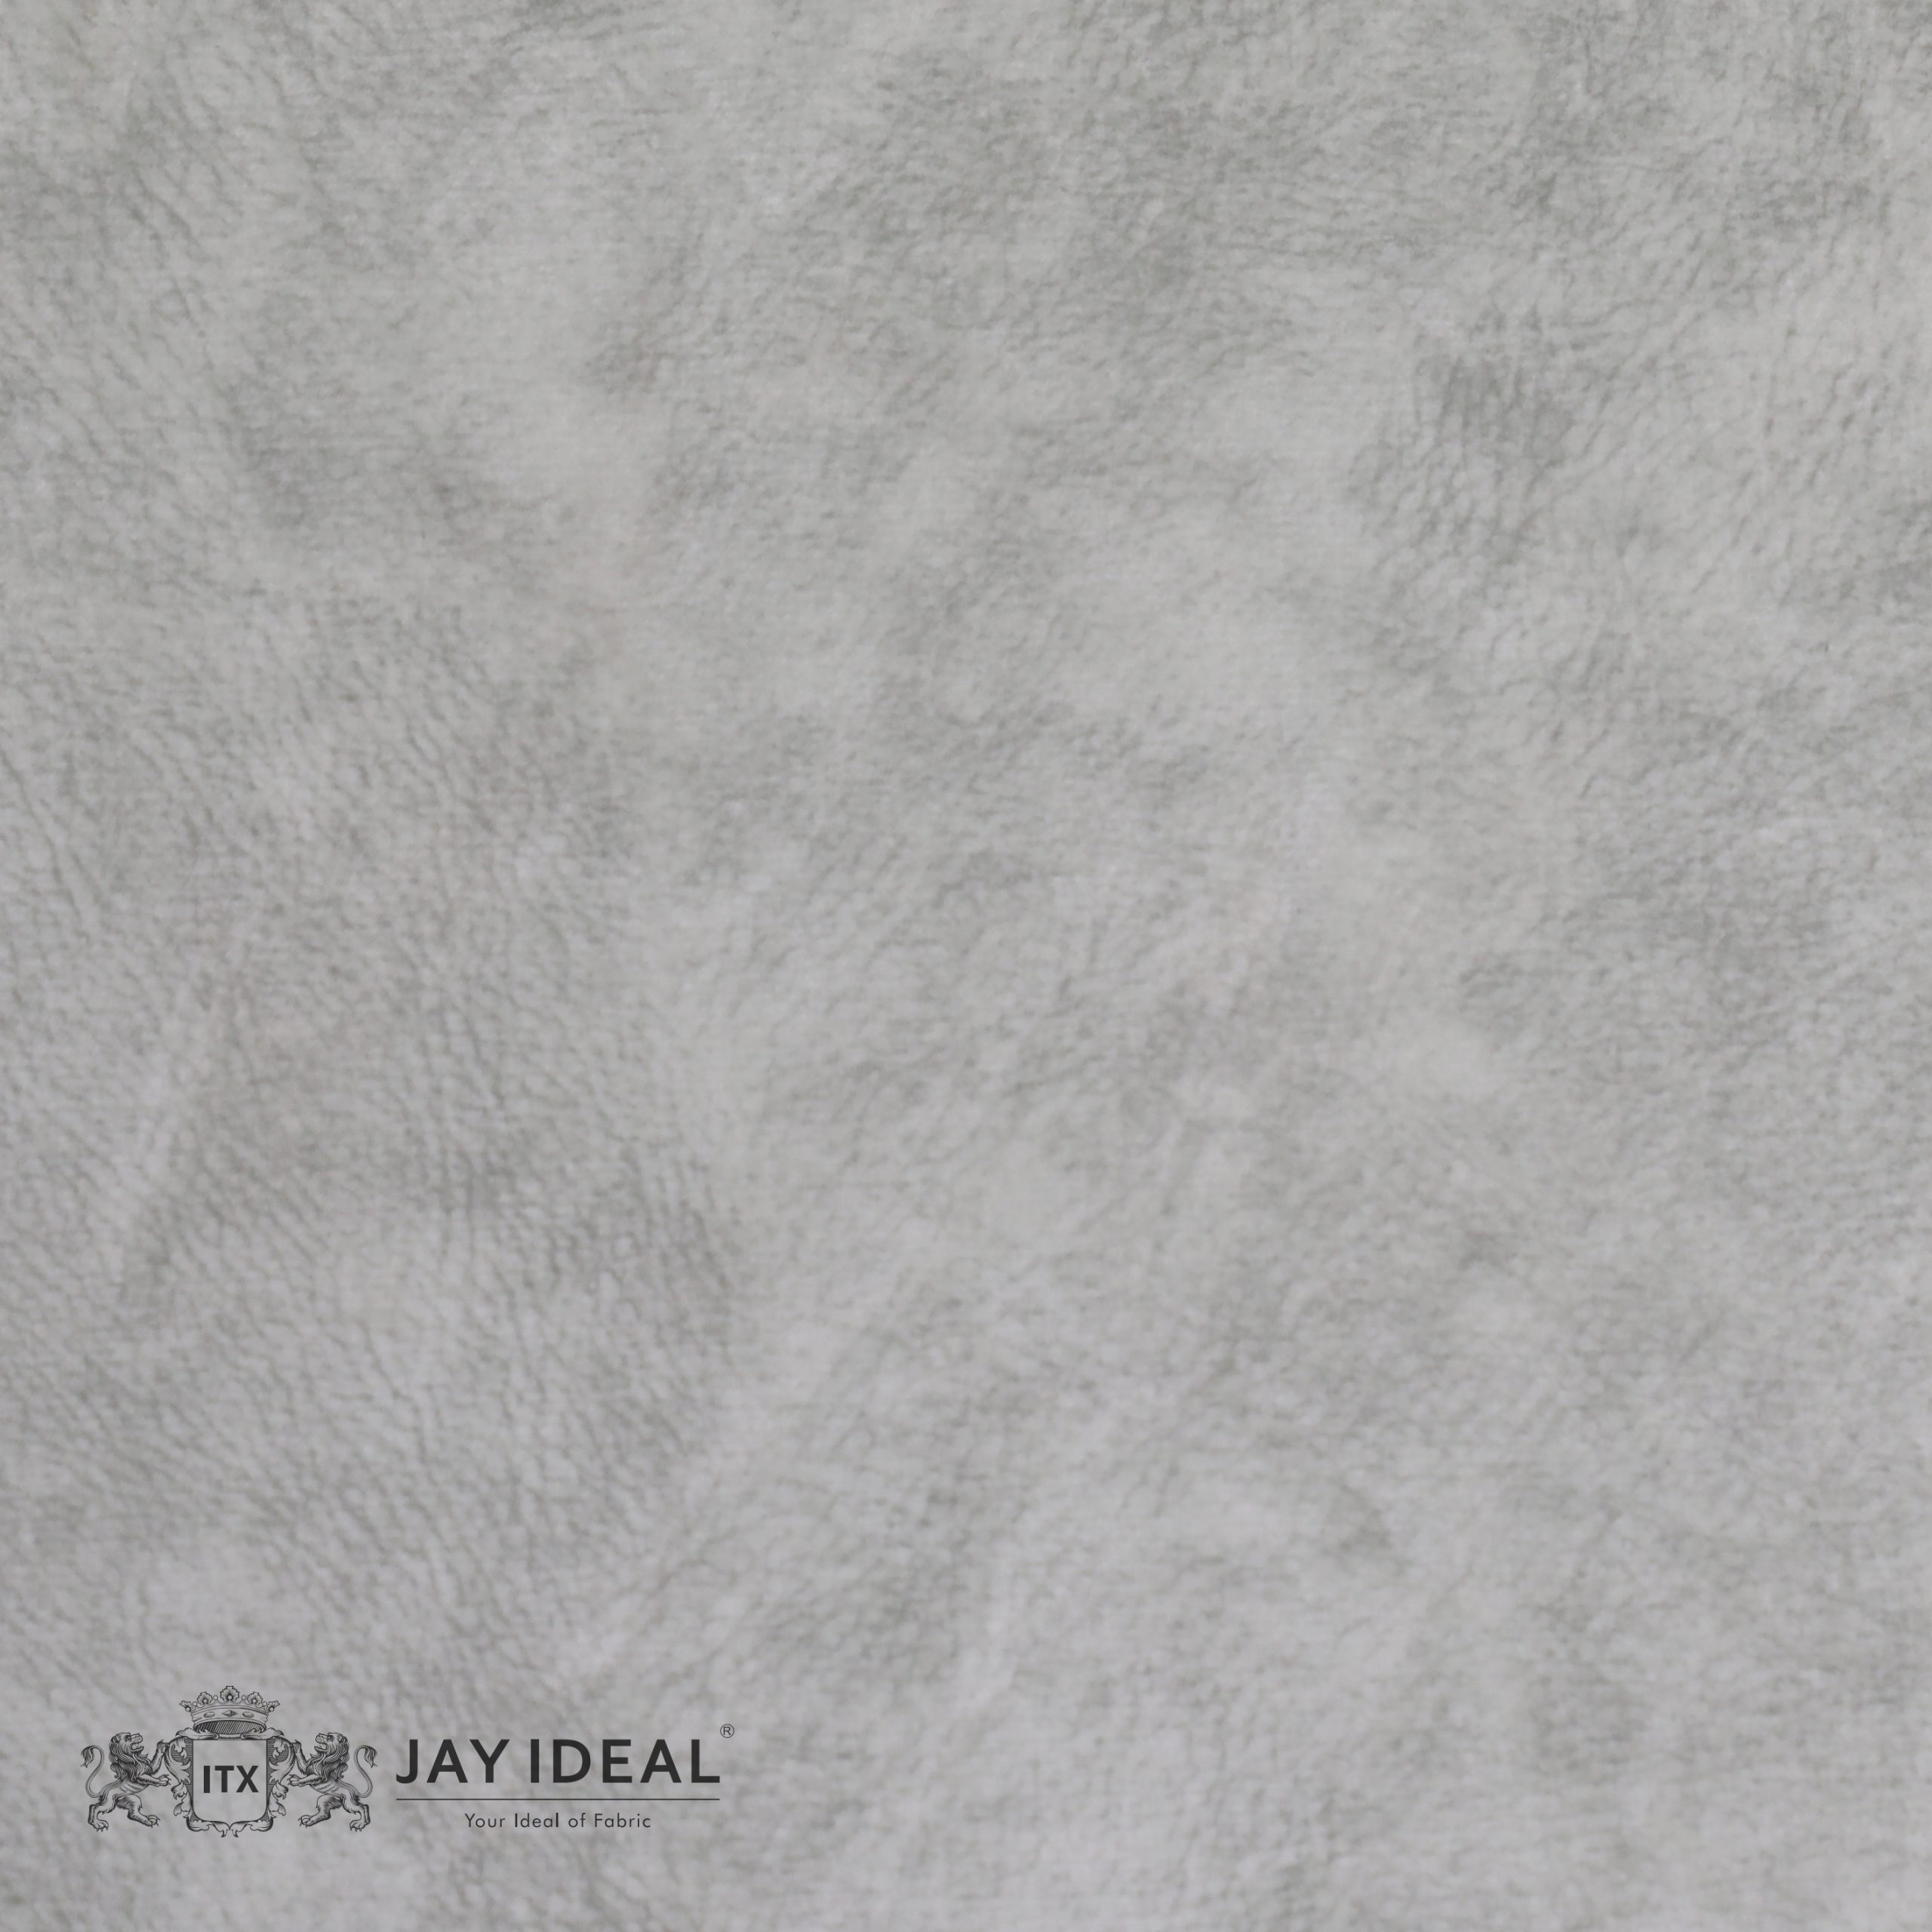 ECO NATURE-CHESTERFIELD-SILVER - Jay Ideal